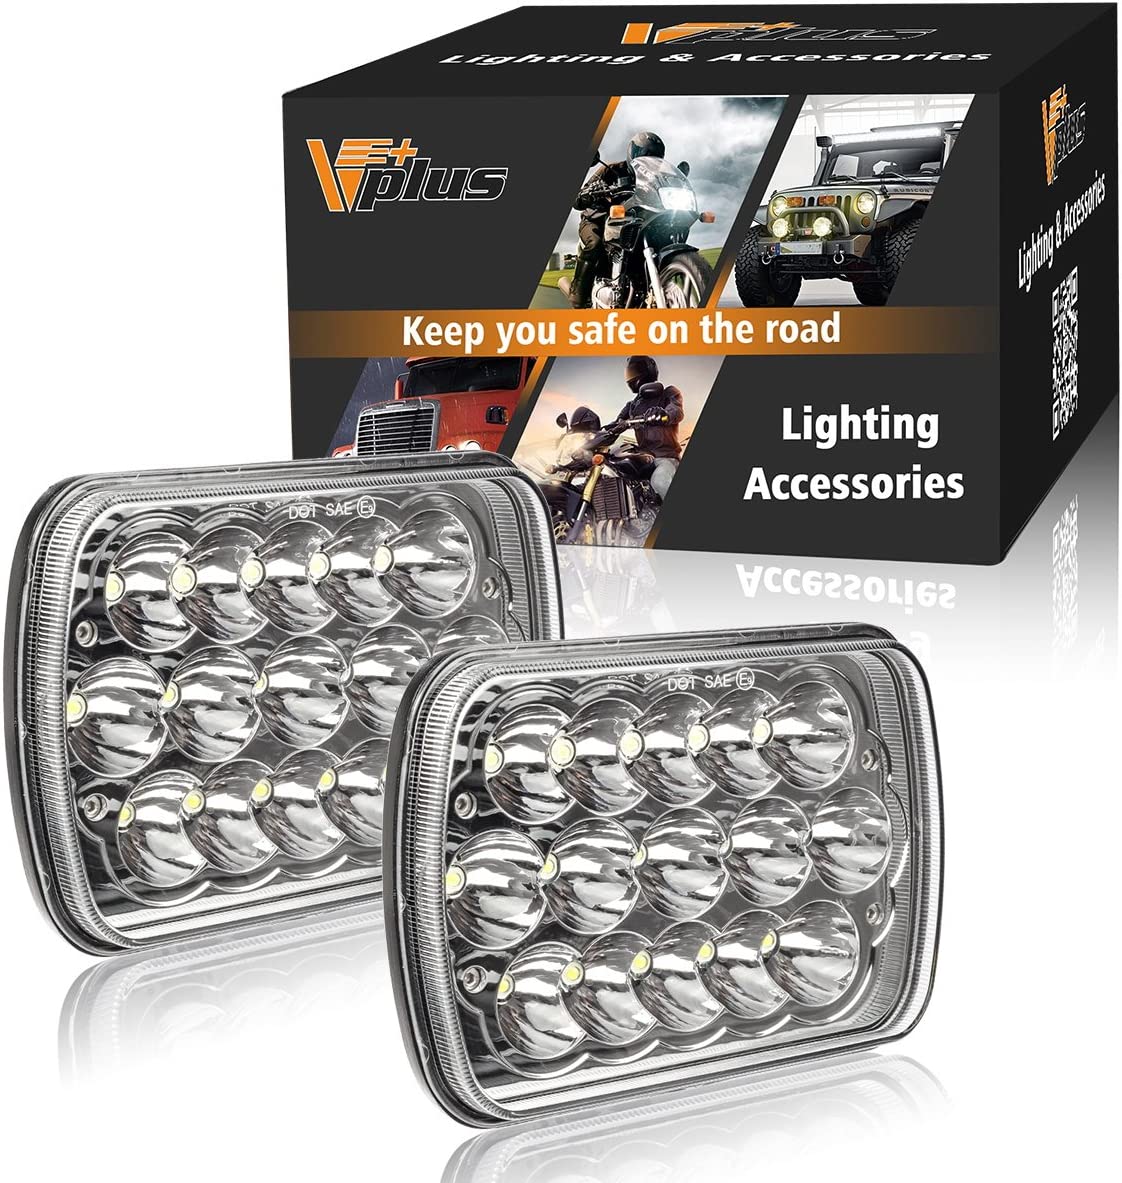 Partsam Headlight Packages for Jeeps